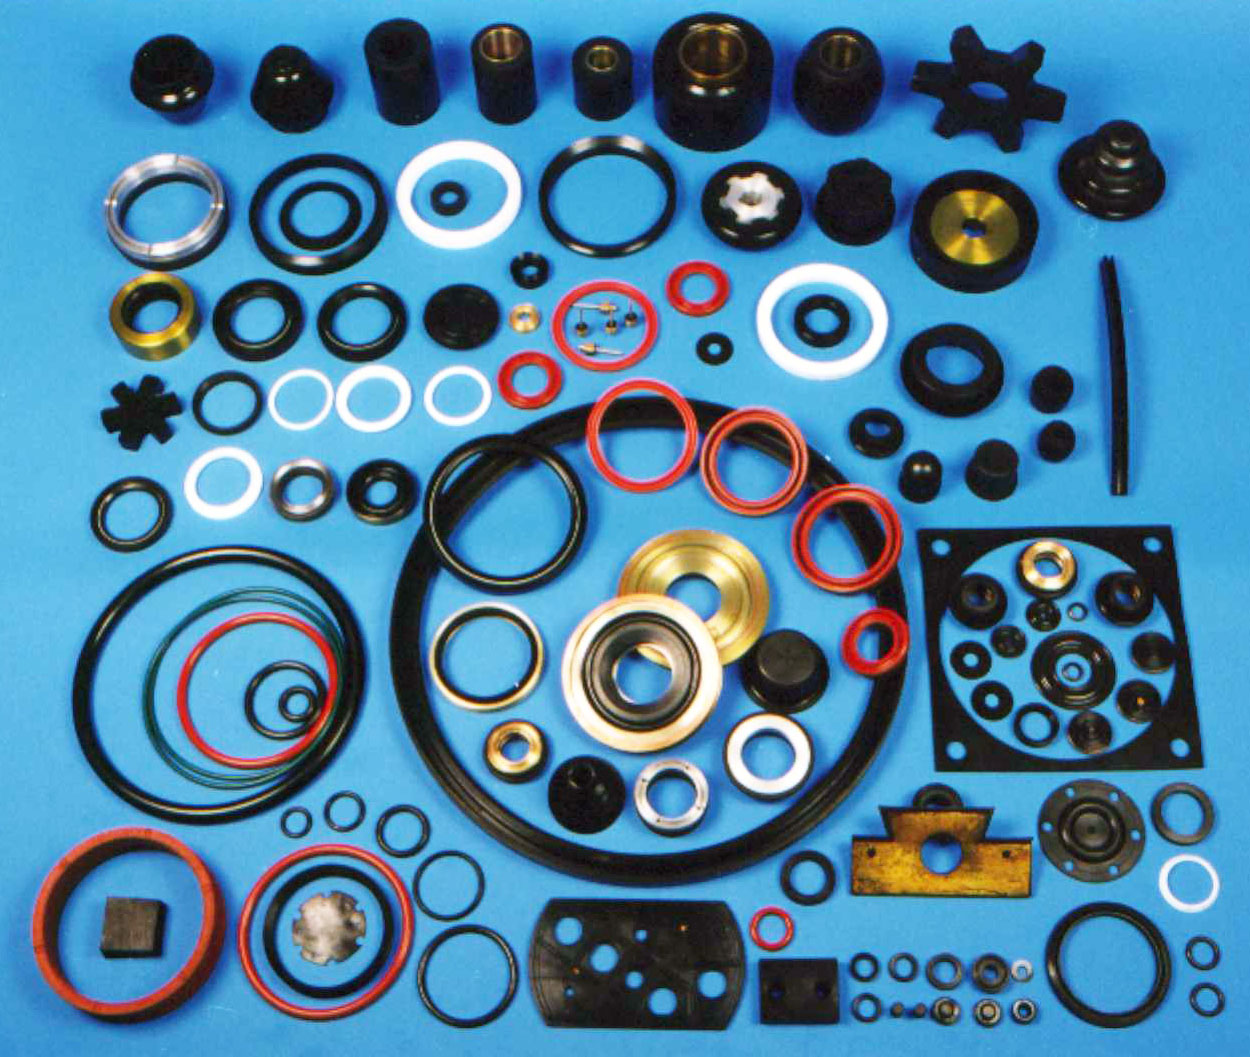 Oil Seals O Rings X Rings Gaskets Bushes Diaphragms Wipers V Rings Boots Bellows Rubber To Metal Bonded Parts